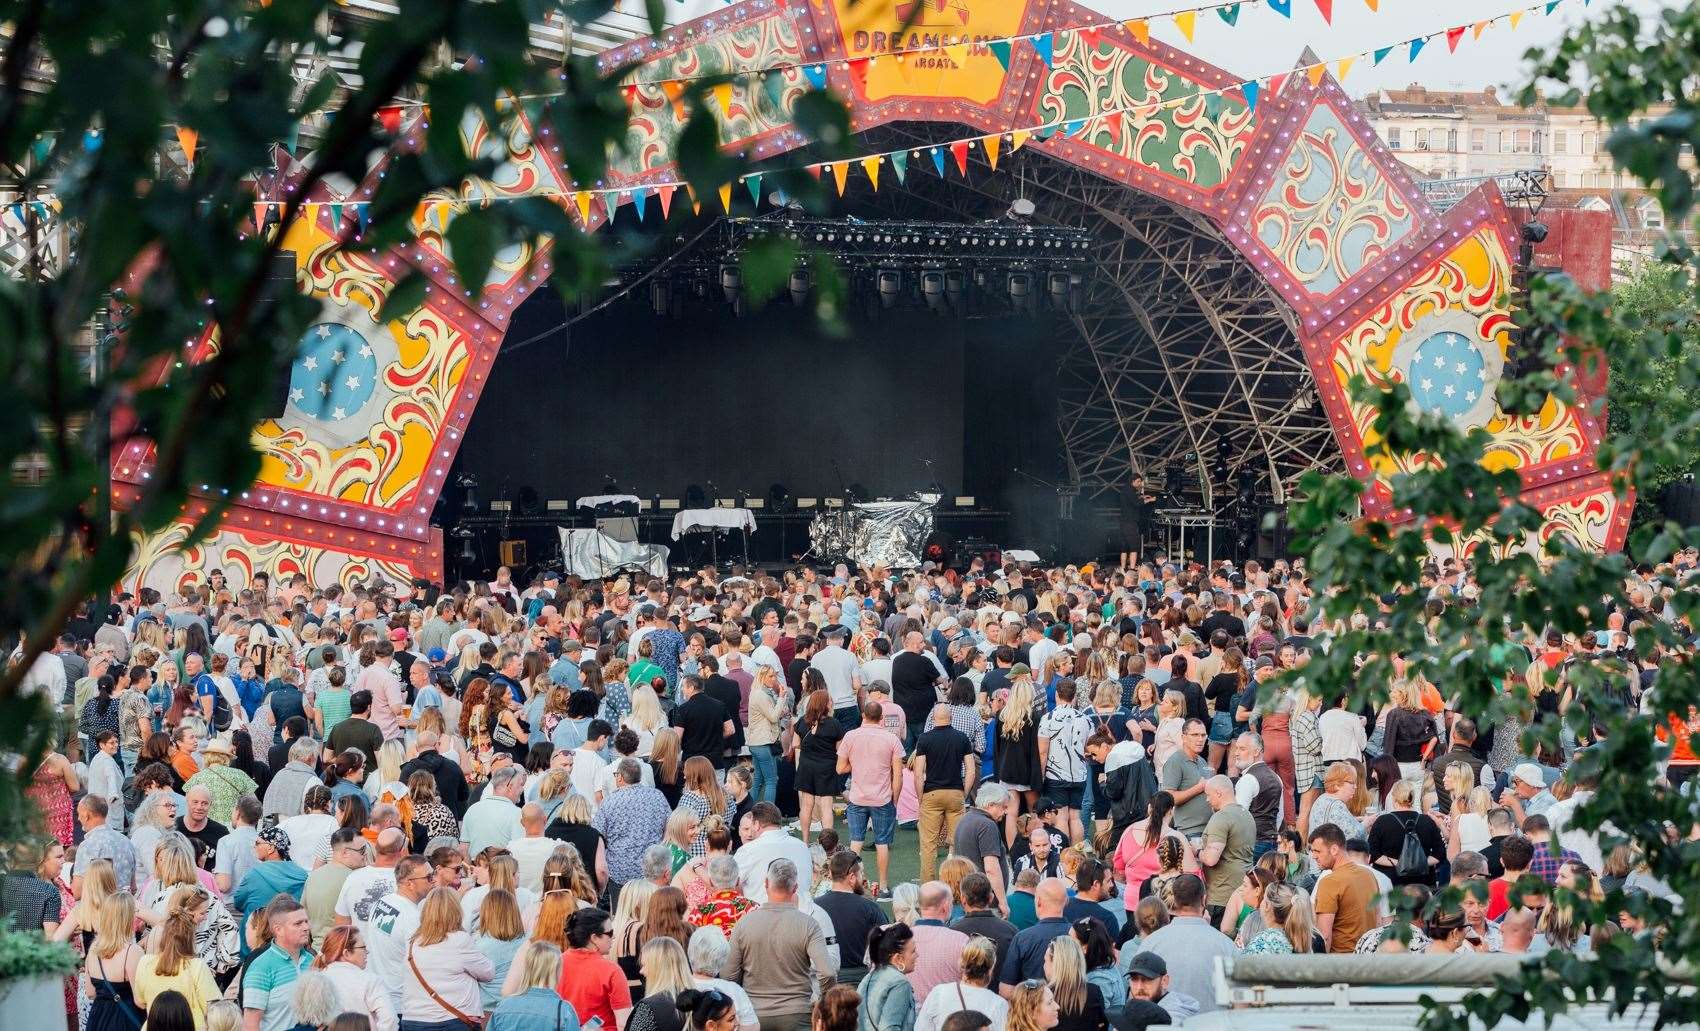 Dreamland in Margate will host a number of outdoor concerts this summer. Picture: Dreamland / Supplied by Two Tyger